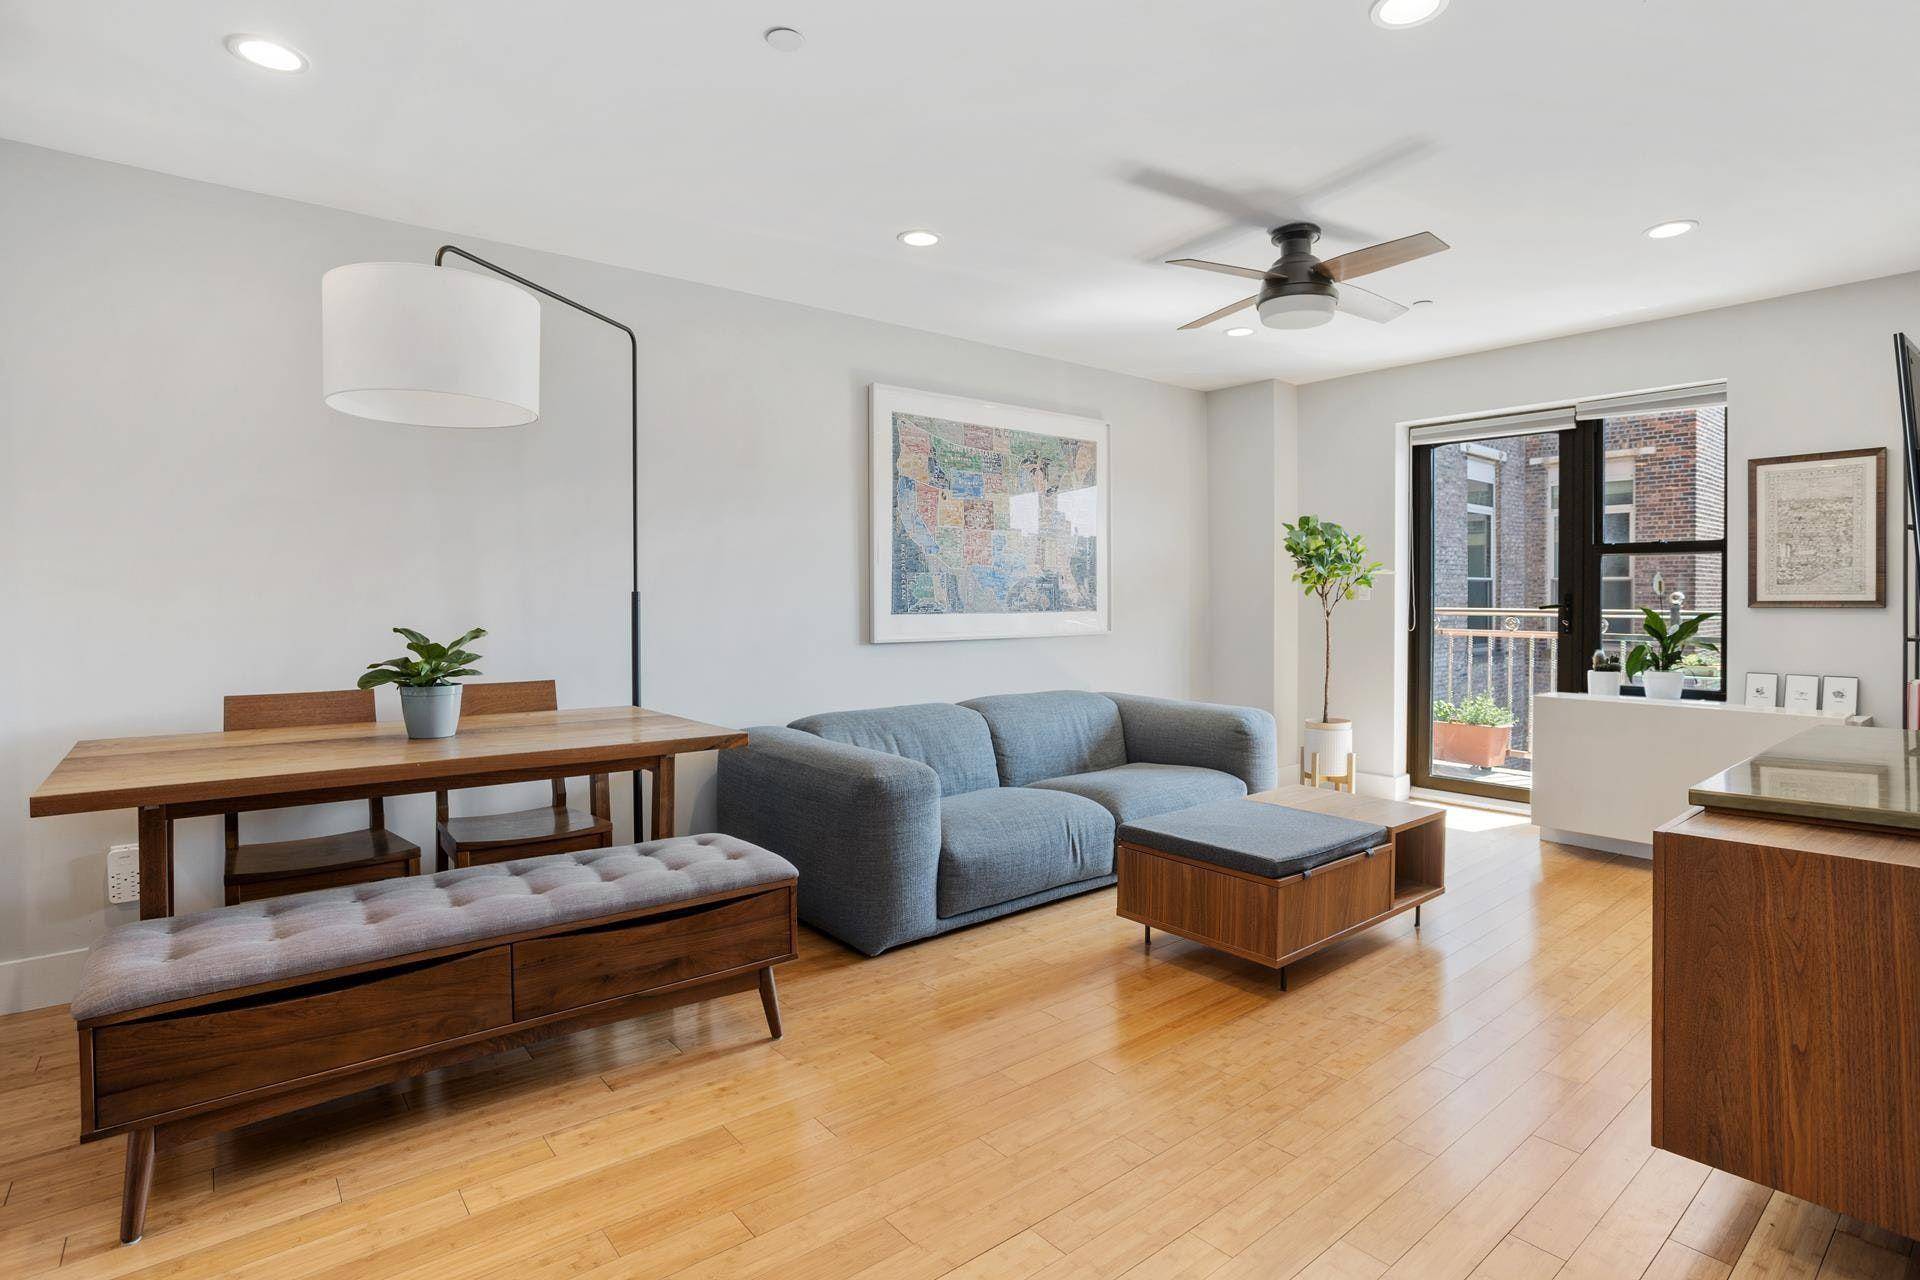 Welcome to 234 West 148th St, where slick design meets chic living.